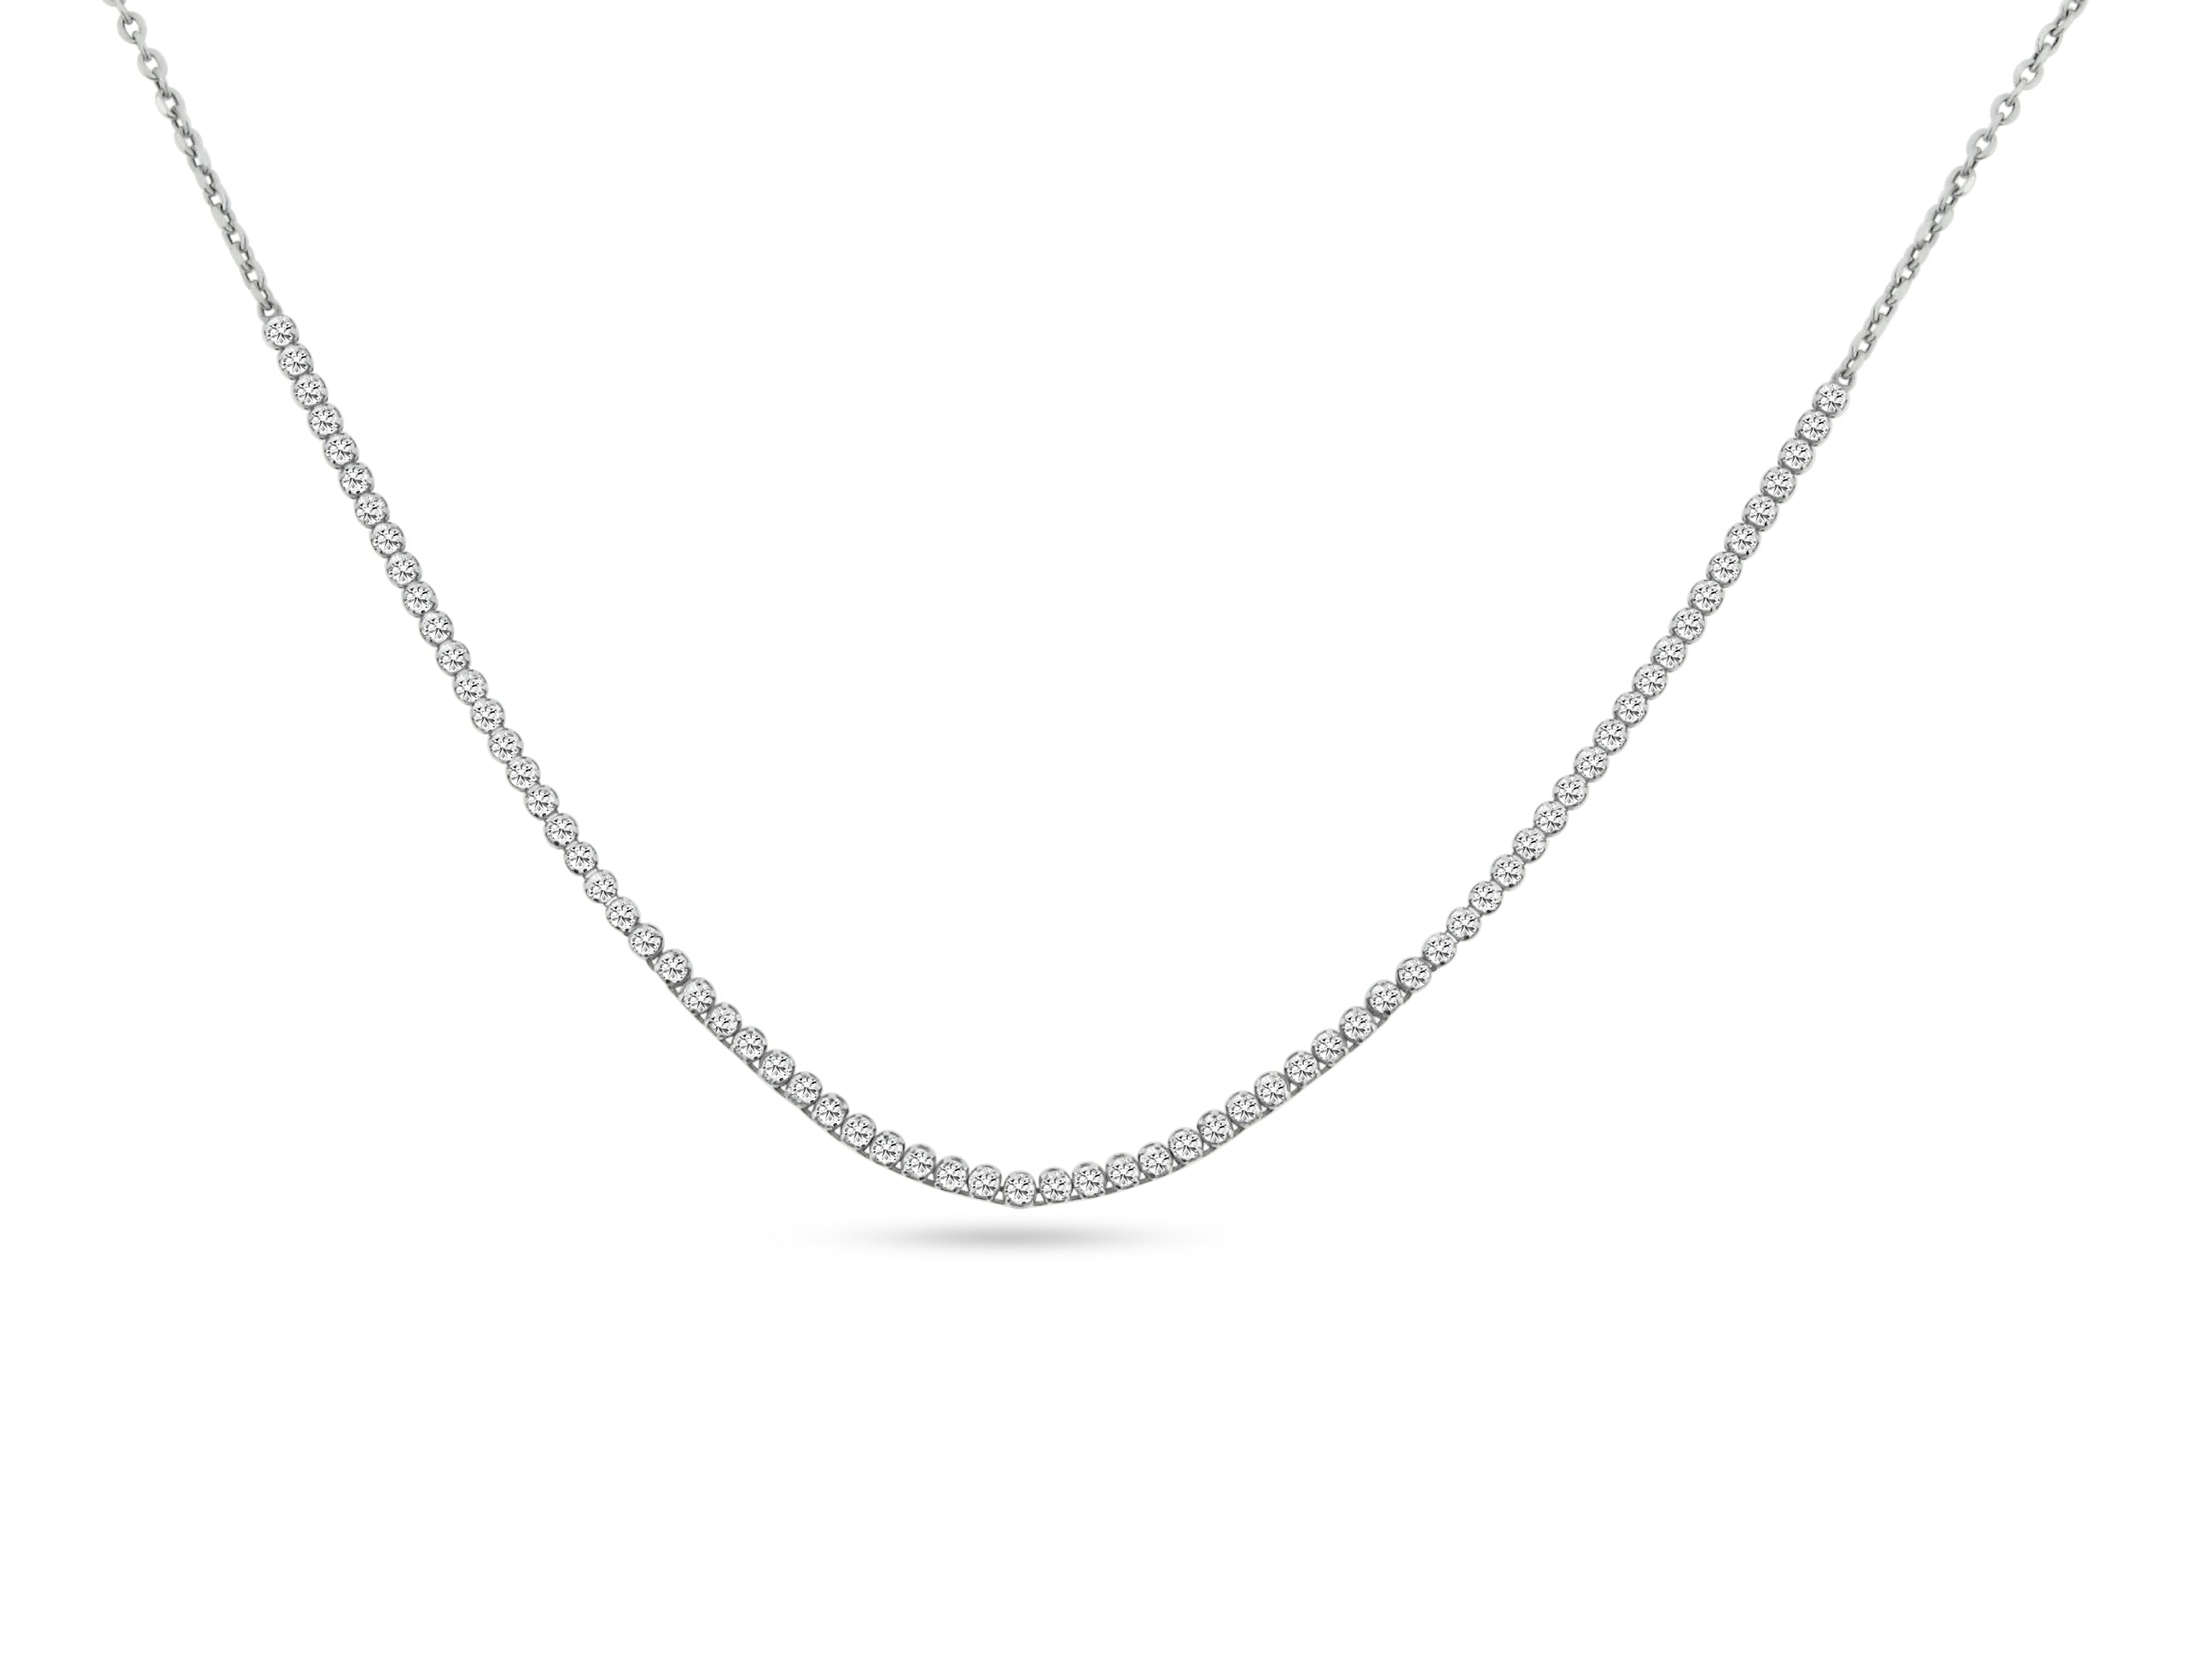 MULLOYS PRIVE'14K YELLOW GOLD 1.55CT SI CLARITY G COLOR DIAMOND TENNIS NECKLACE